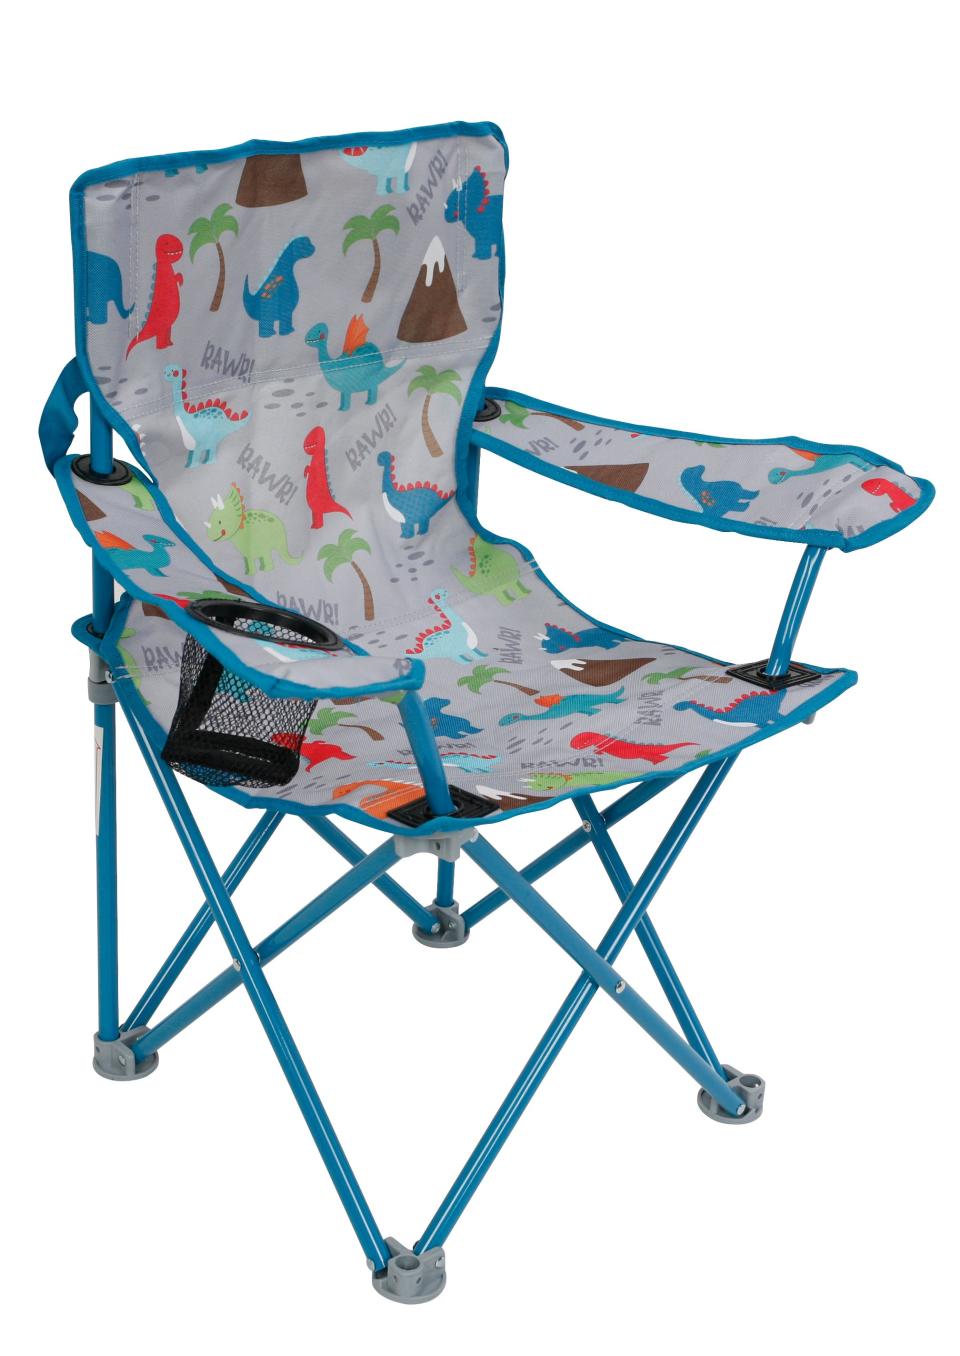 9) Crckt Folding Camp Chair for Kids with Lock